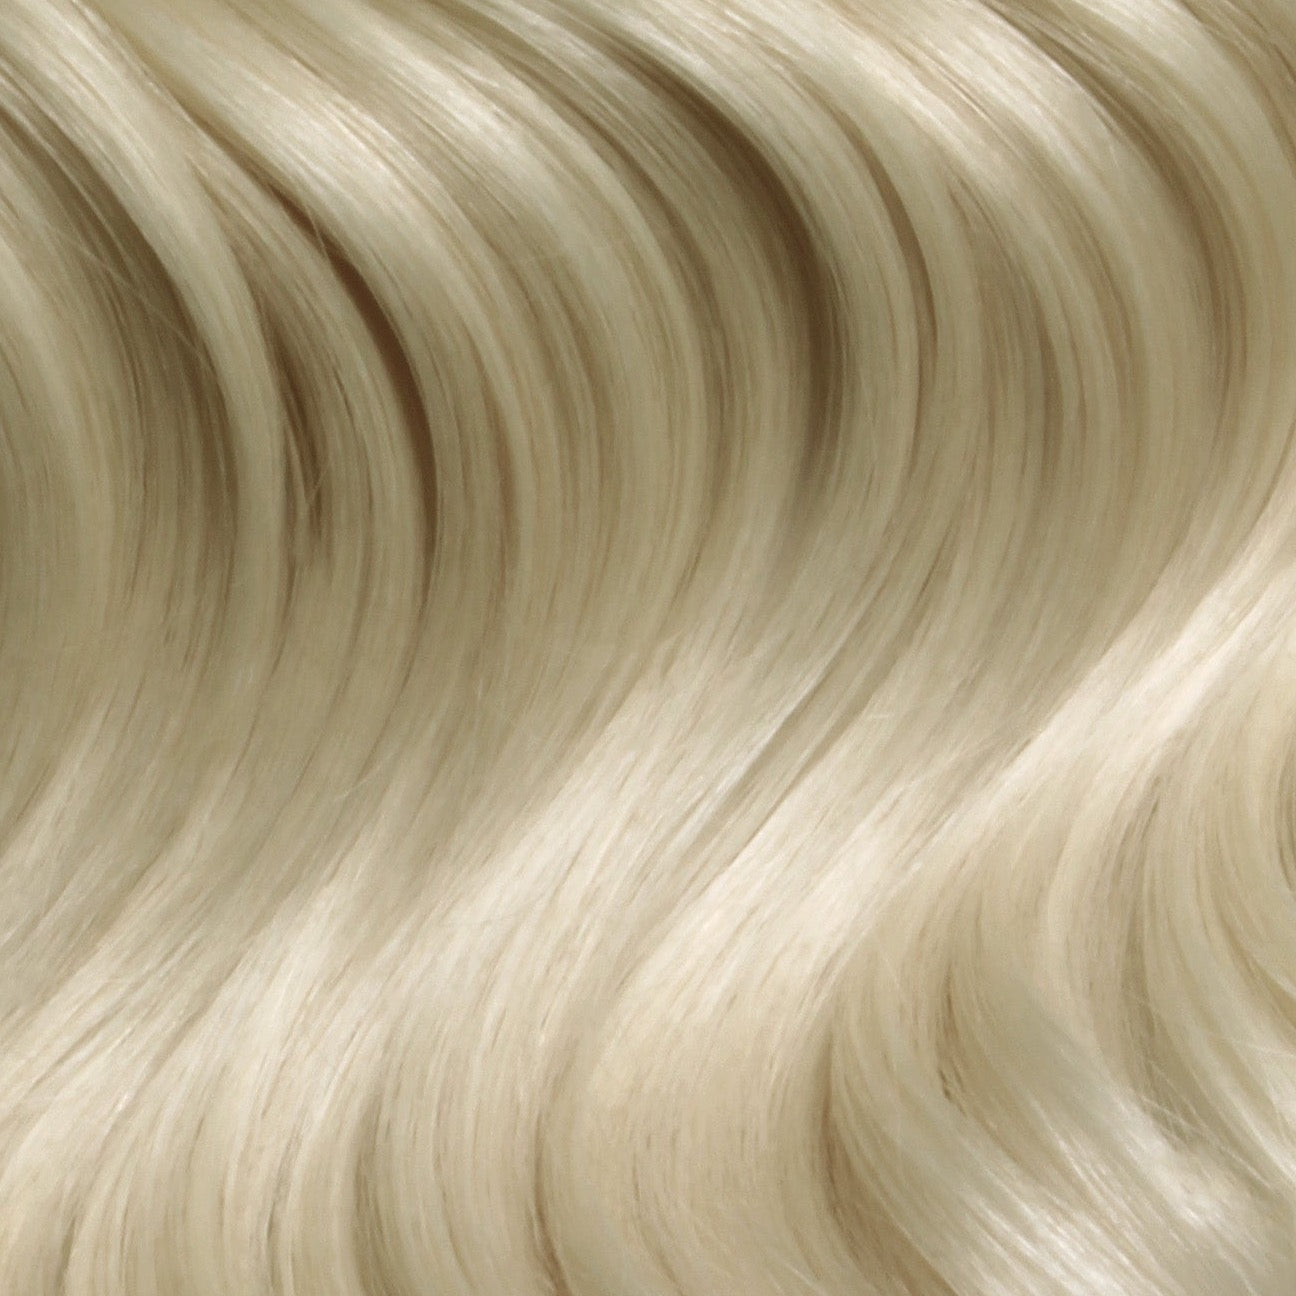 Nano Bonds 20 Inches - SWAY Hair Extensions Sandy-Blonde-60 Ultra-fine, invisible bonds for a flawless, natural look. 100% Remy Human hair, lightweight and versatile. Reusable and perfect for individual or salon use.